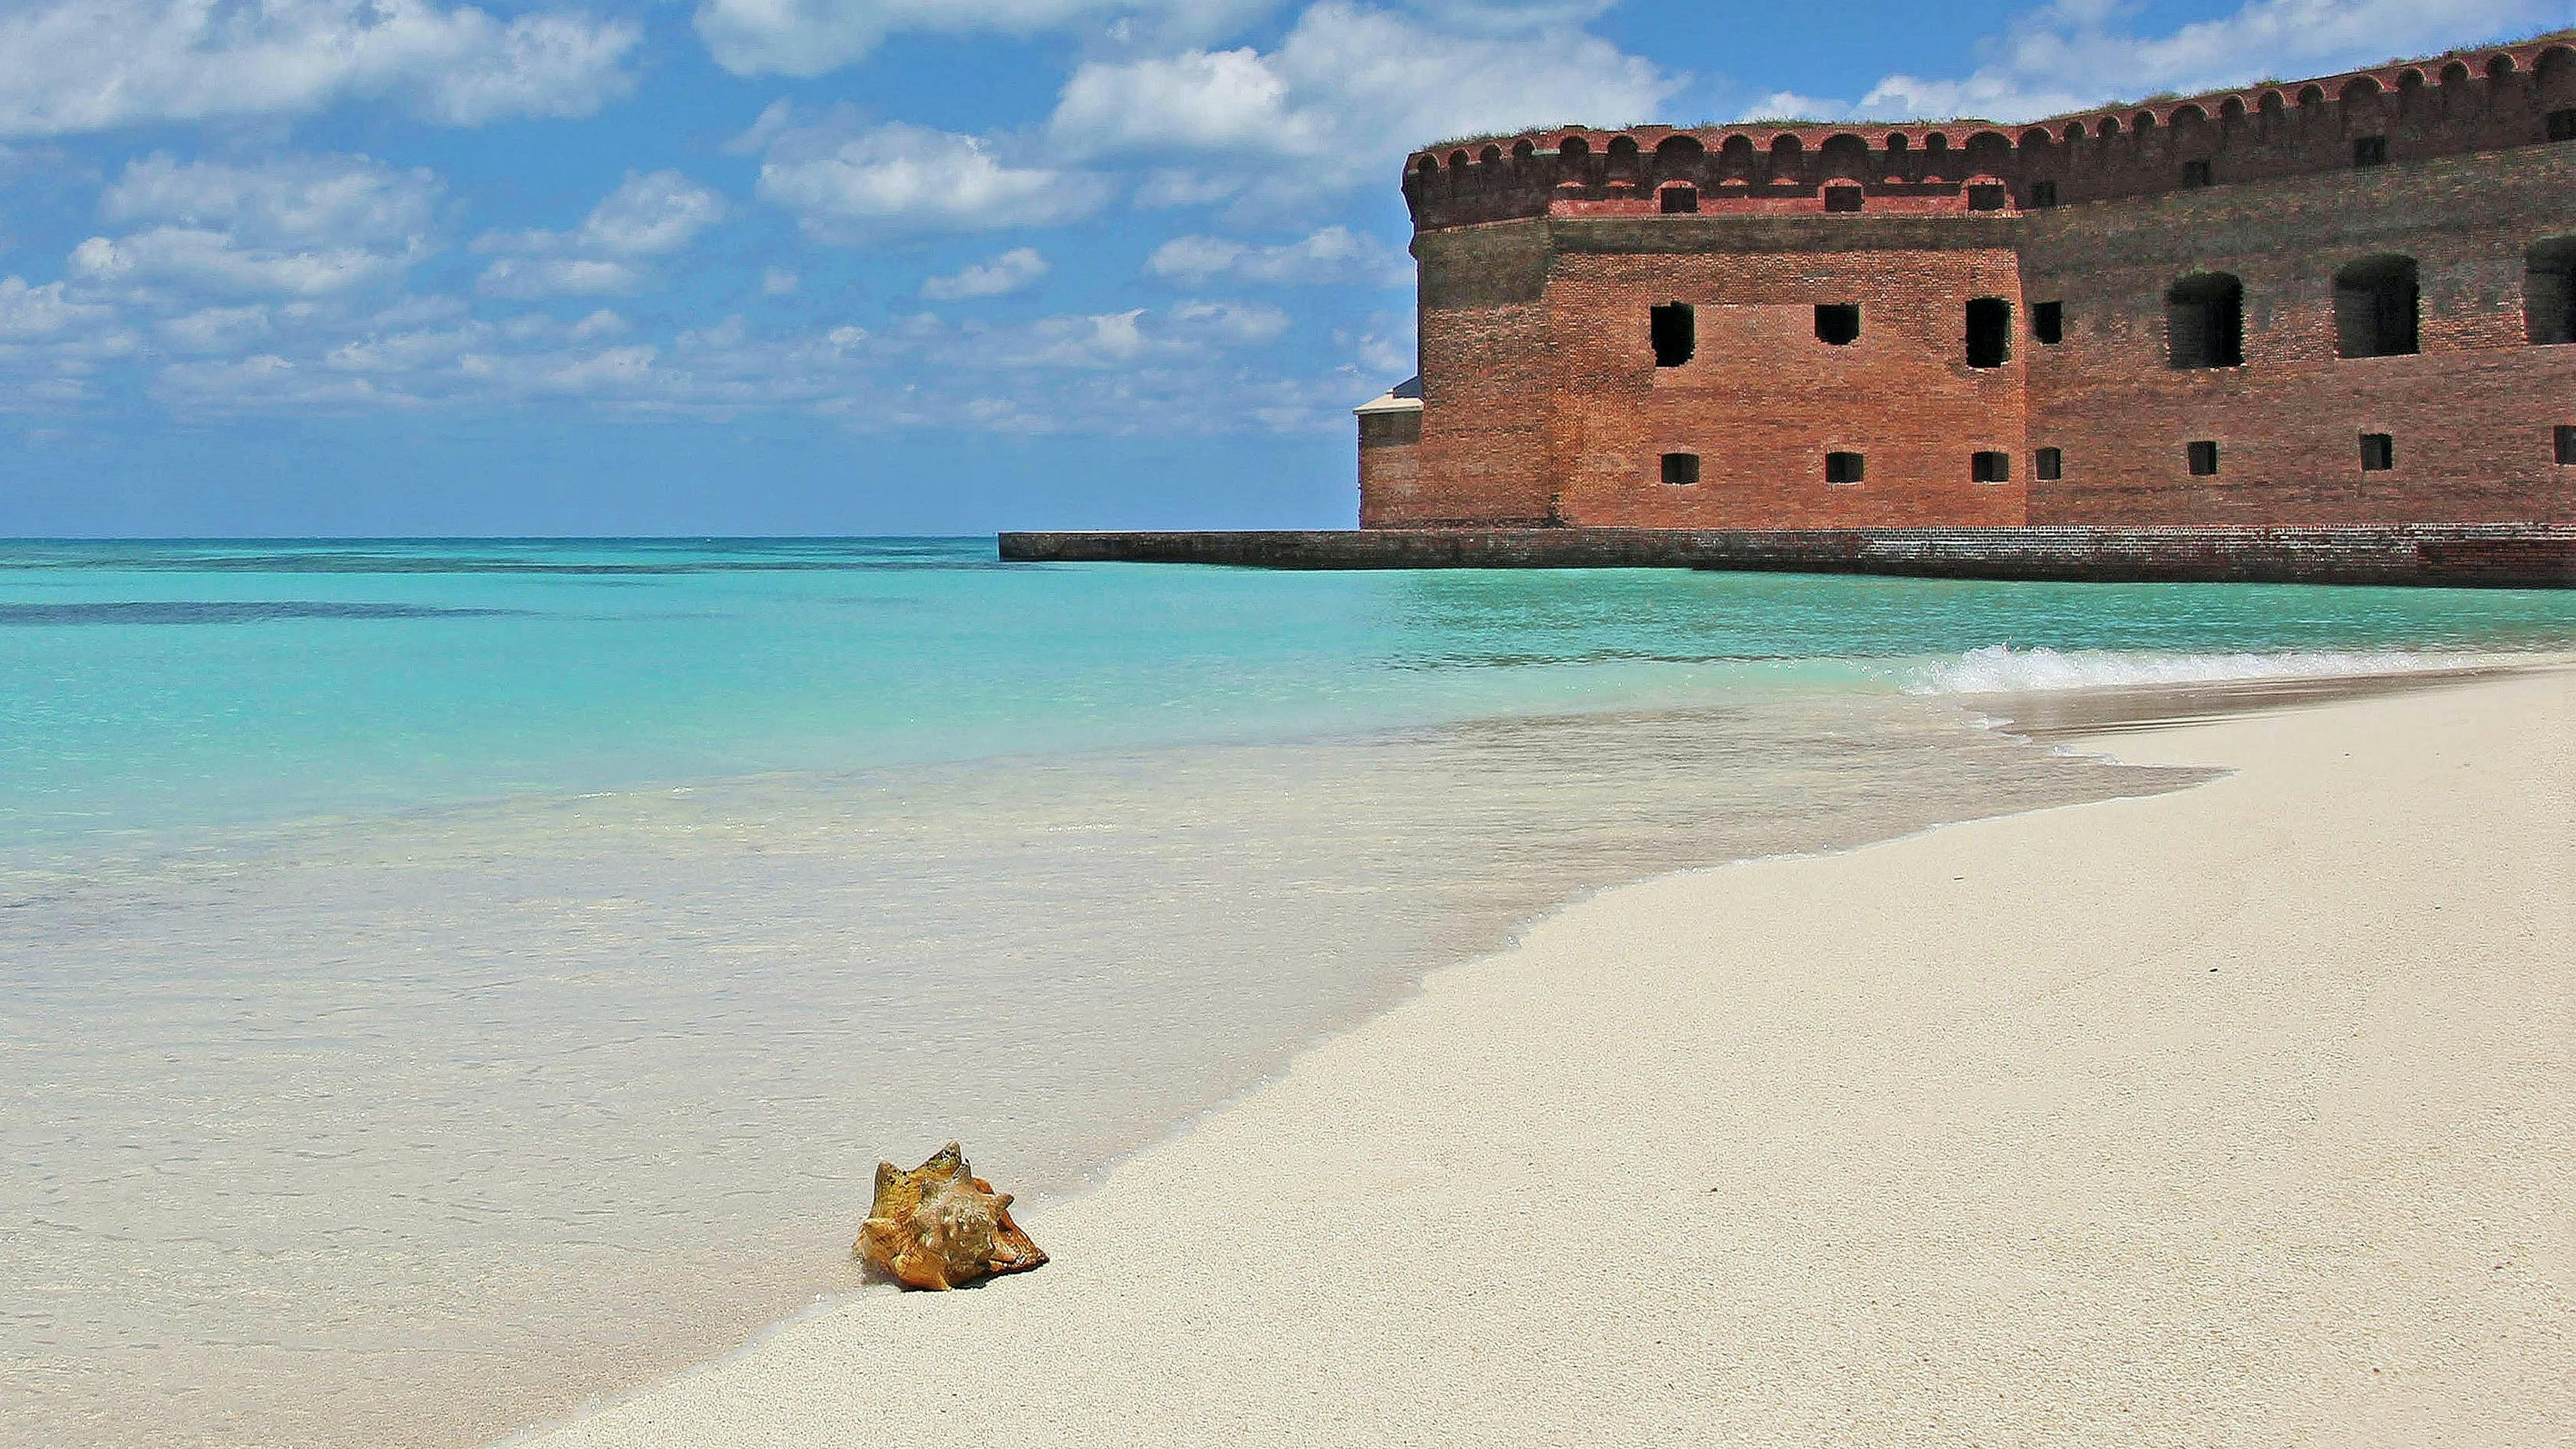 The fort at Dry Tortugas extends into the ocean. A shell sits on the sand in the foreground.